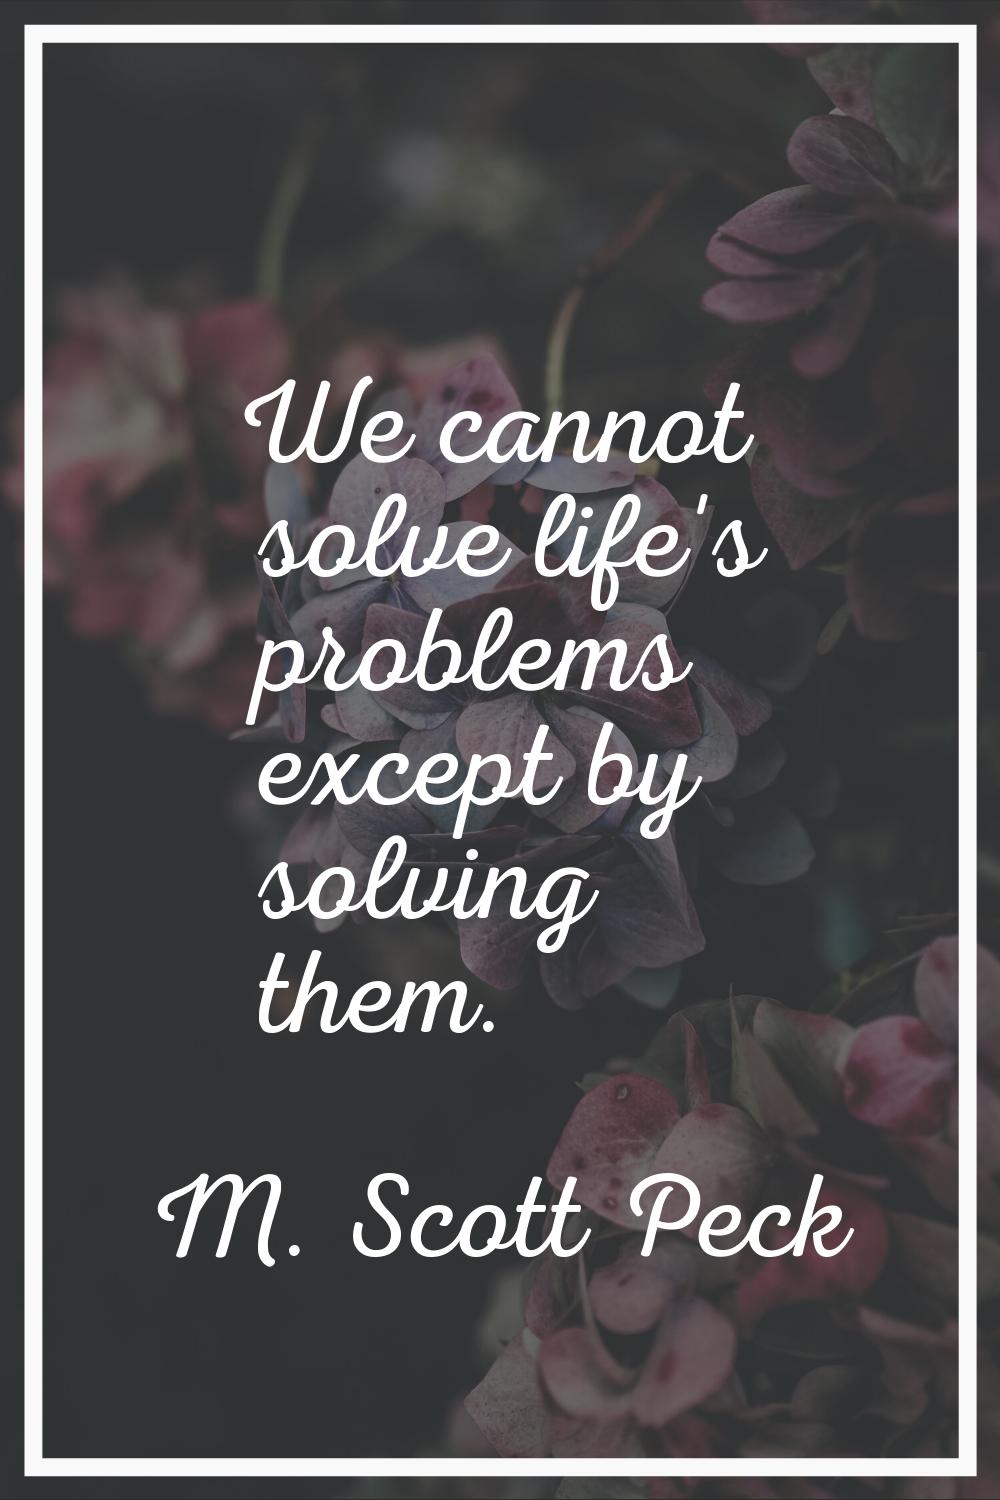 We cannot solve life's problems except by solving them.